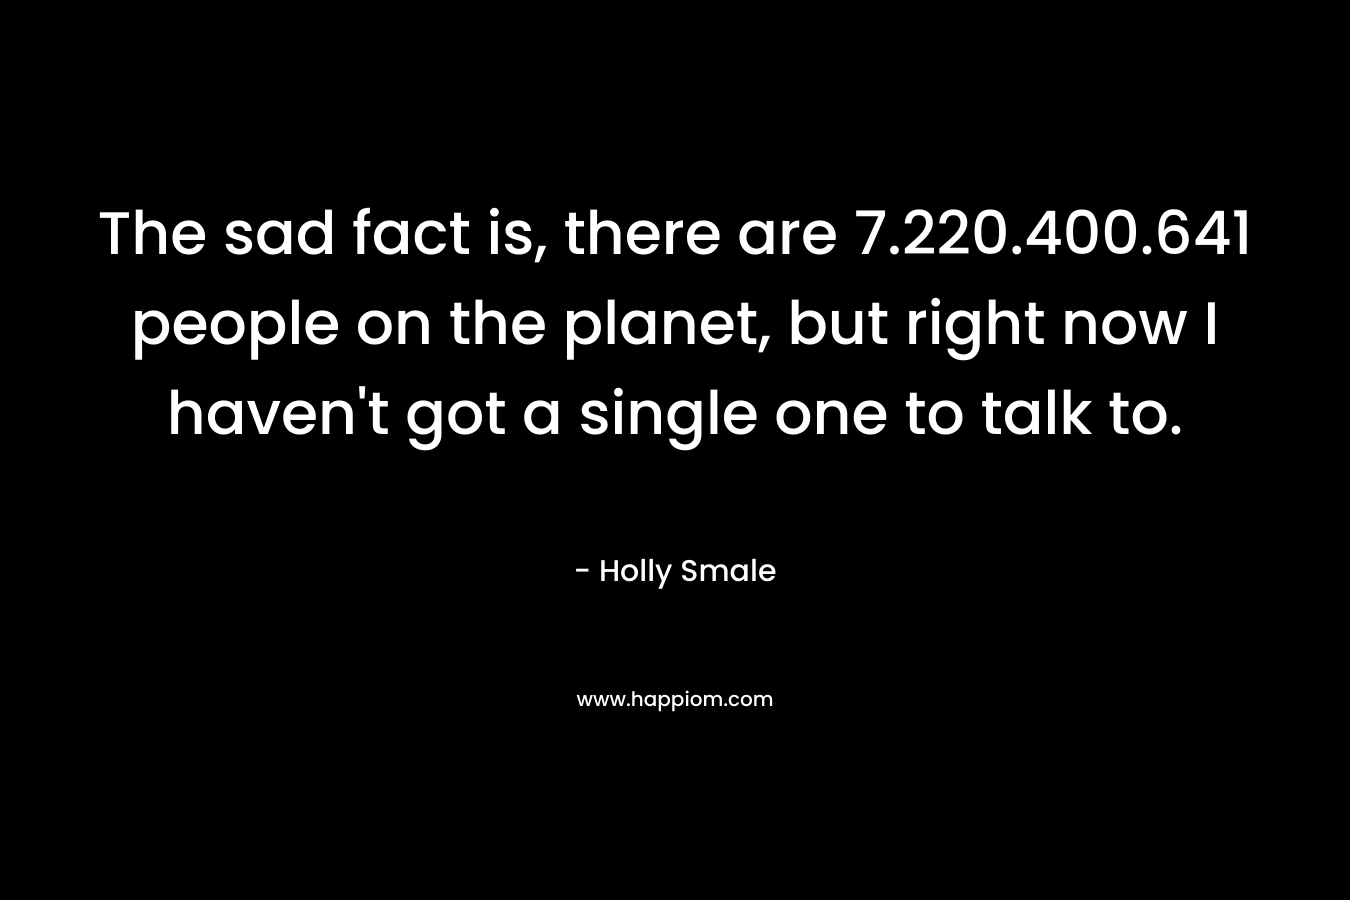 The sad fact is, there are 7.220.400.641 people on the planet, but right now I haven’t got a single one to talk to. – Holly Smale